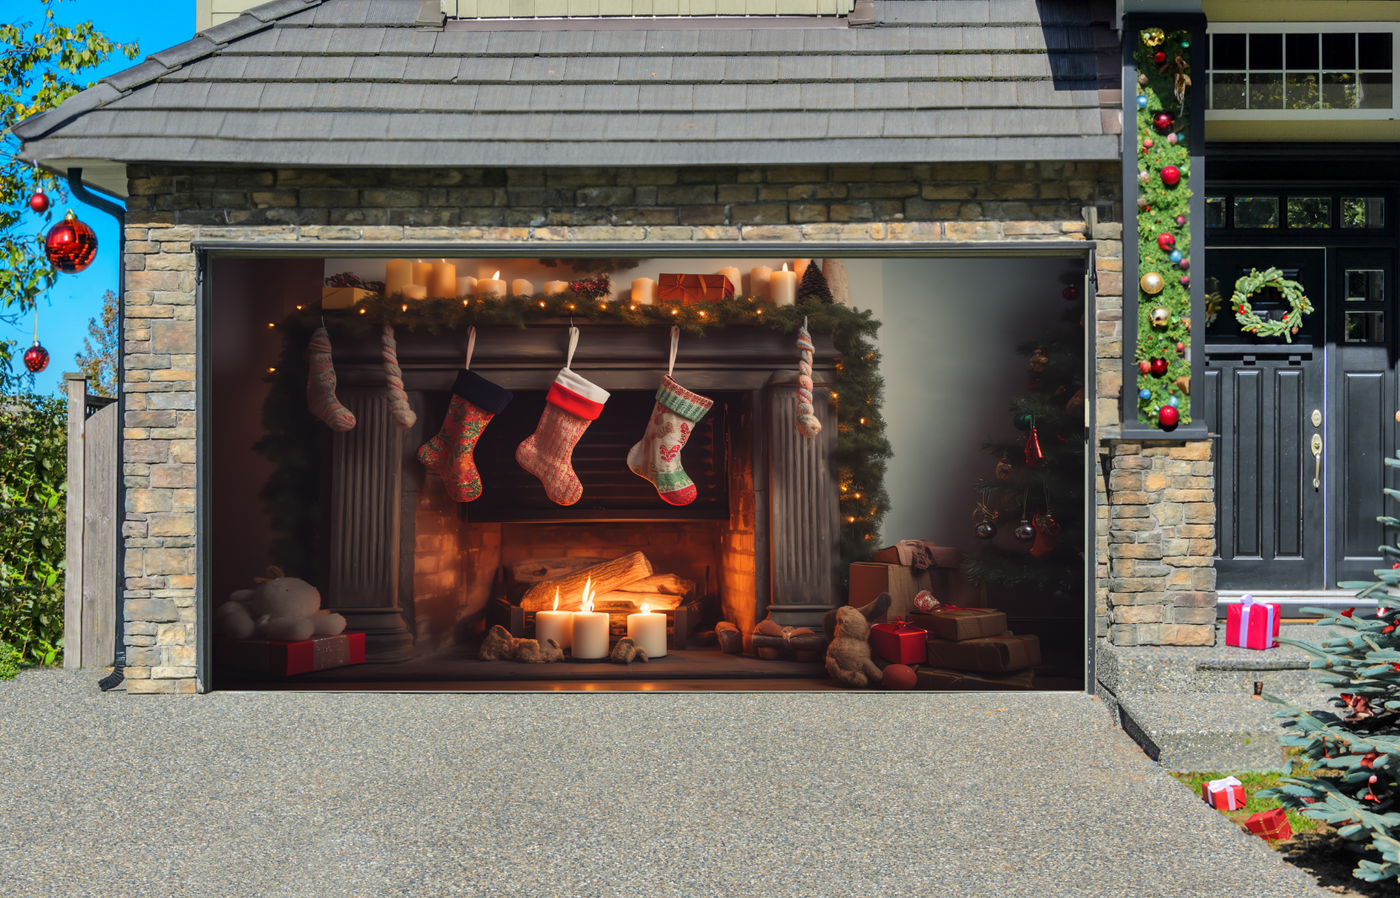 Fireplace with Christmas Decorations Garage Door Cover Wrap Backdrop D